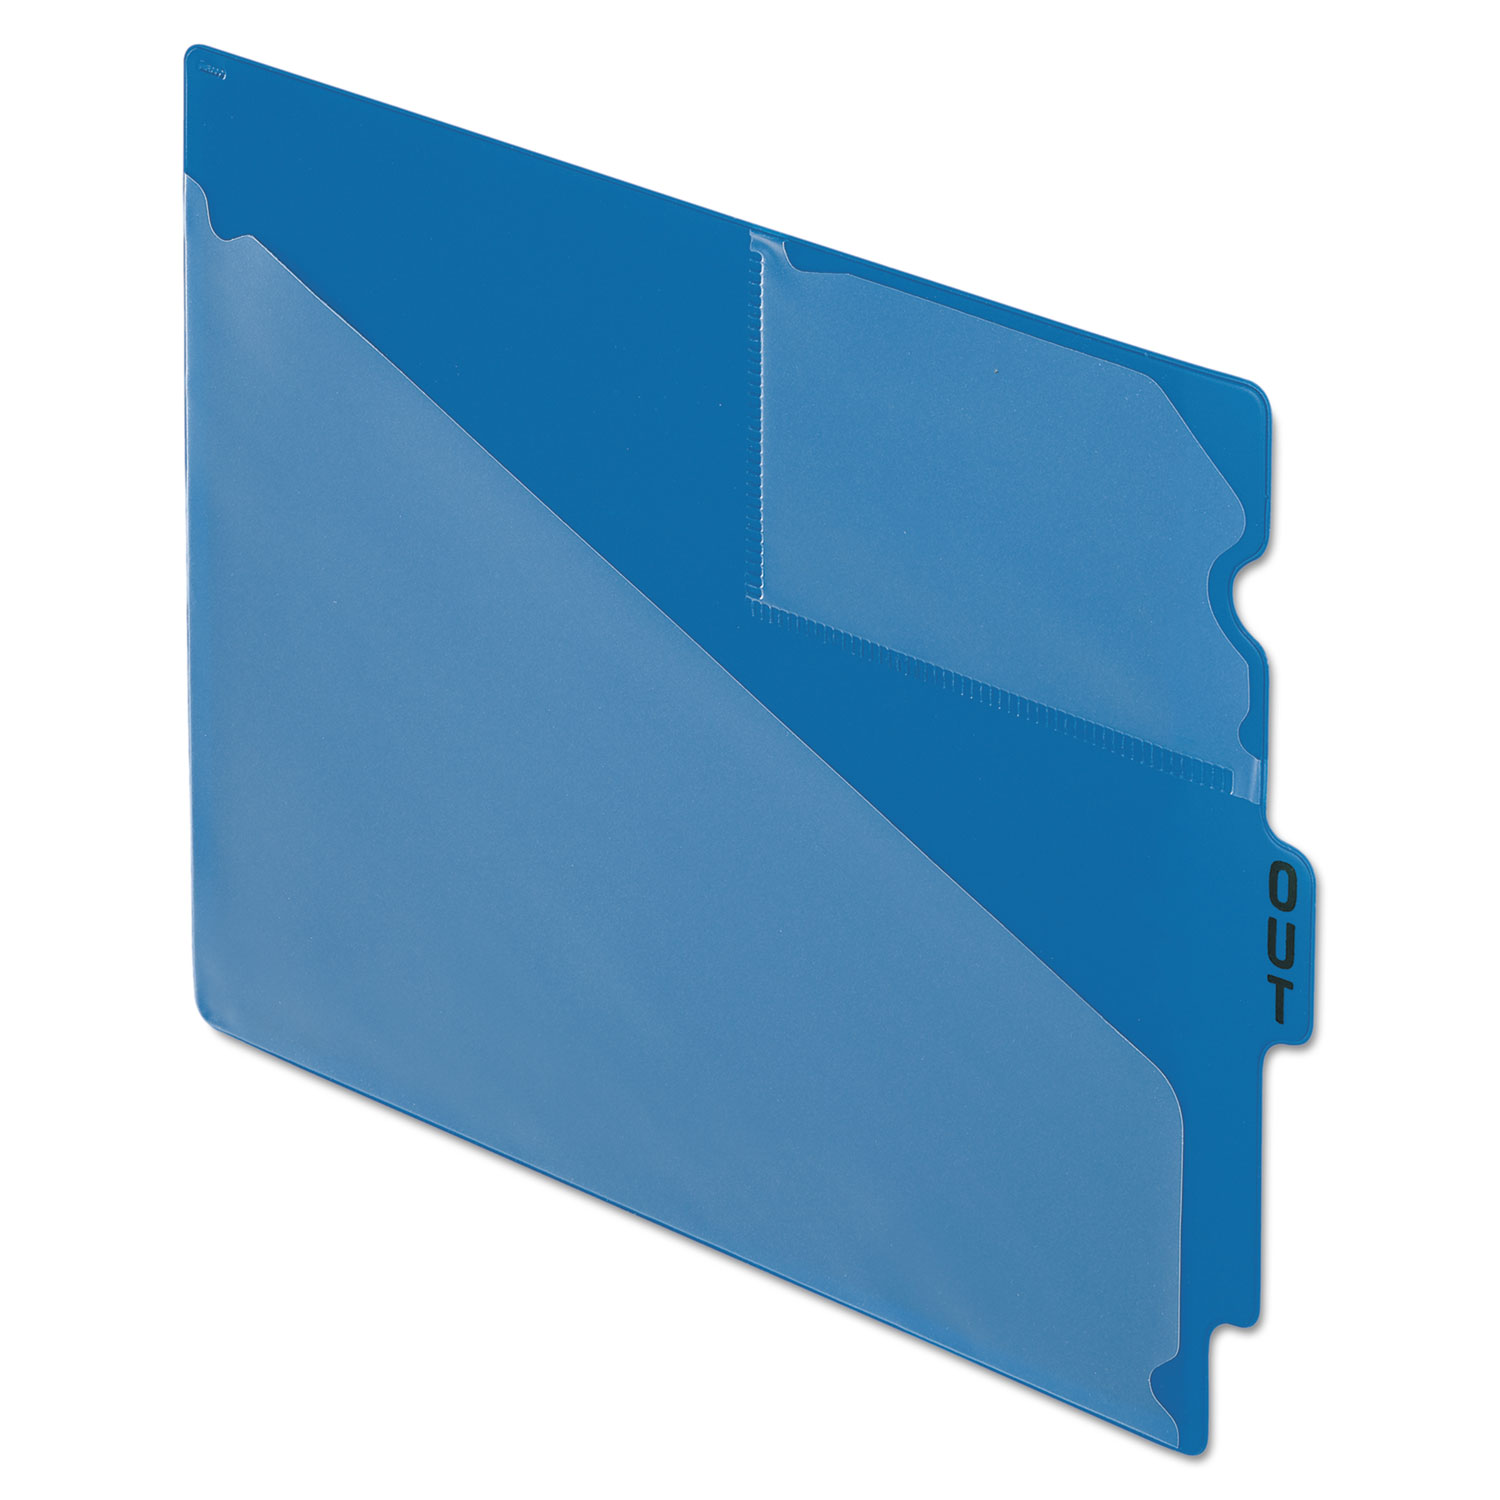  Pendaflex 13542 Colored Poly Out Guides with Center Tab, 1/3-Cut End Tab, Out, 8.5 x 11, Blue, 50/Box (PFX13542) 